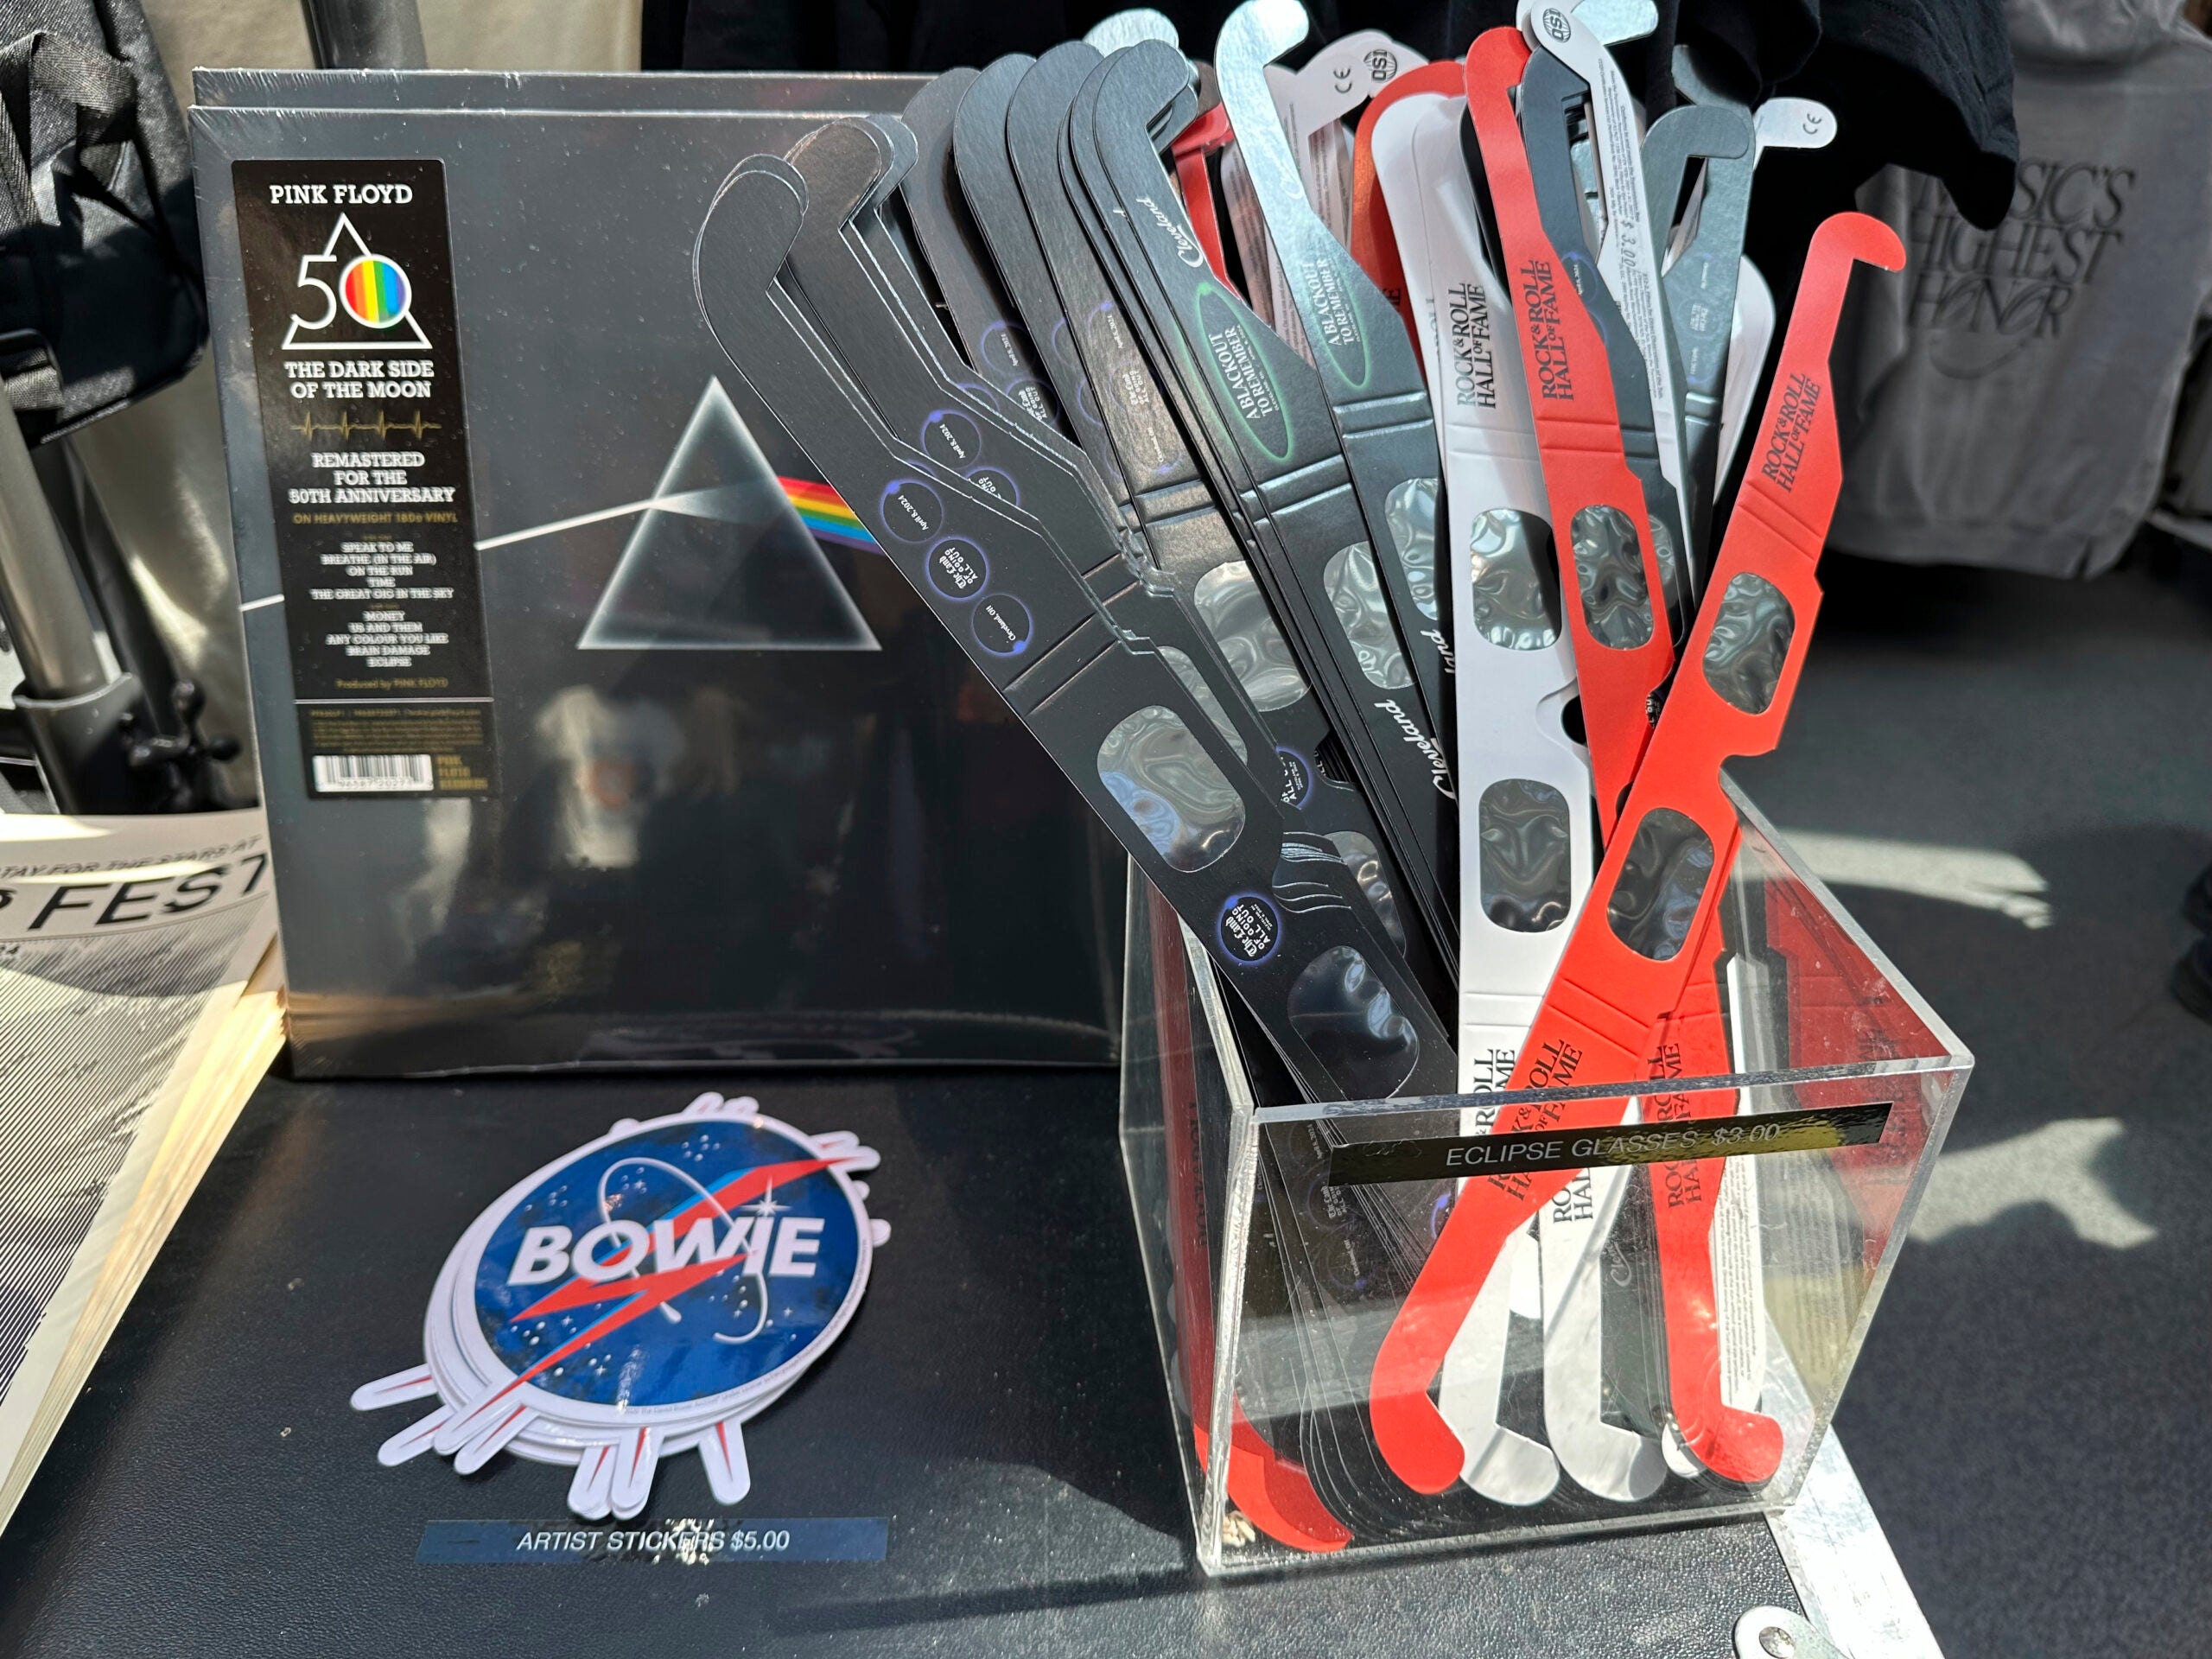 Eclipse glasses are for sale along with Pink Floyd's "Dark Side of the Moon," album at the Rock & Roll Hall of Fame in Cleveland.